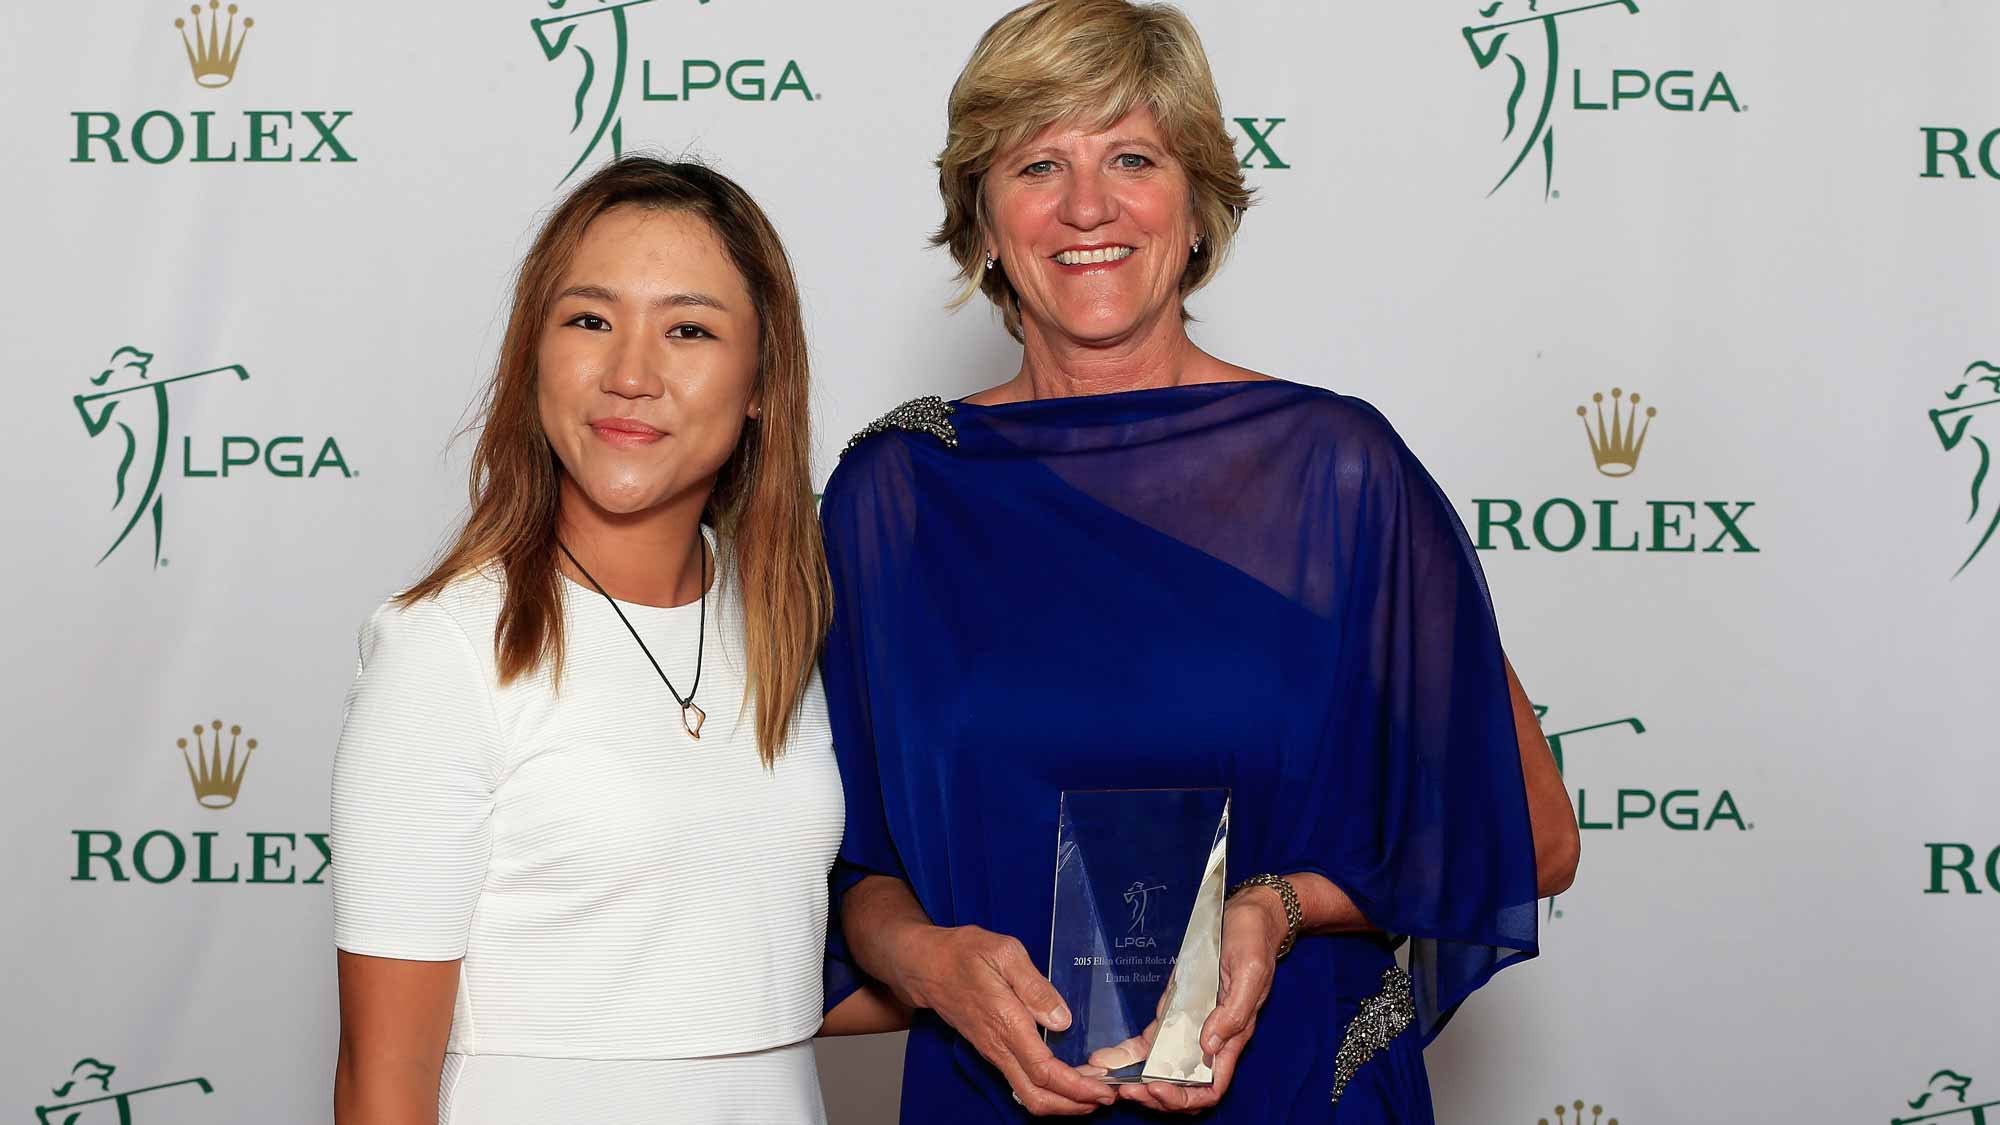 Lydia Ko of New Zealand (L) poses with Ellen Griffin Rolex Award winner Dana Rader during the LPGA Rolex Players Awards at the Ritz-Carlton, Naples